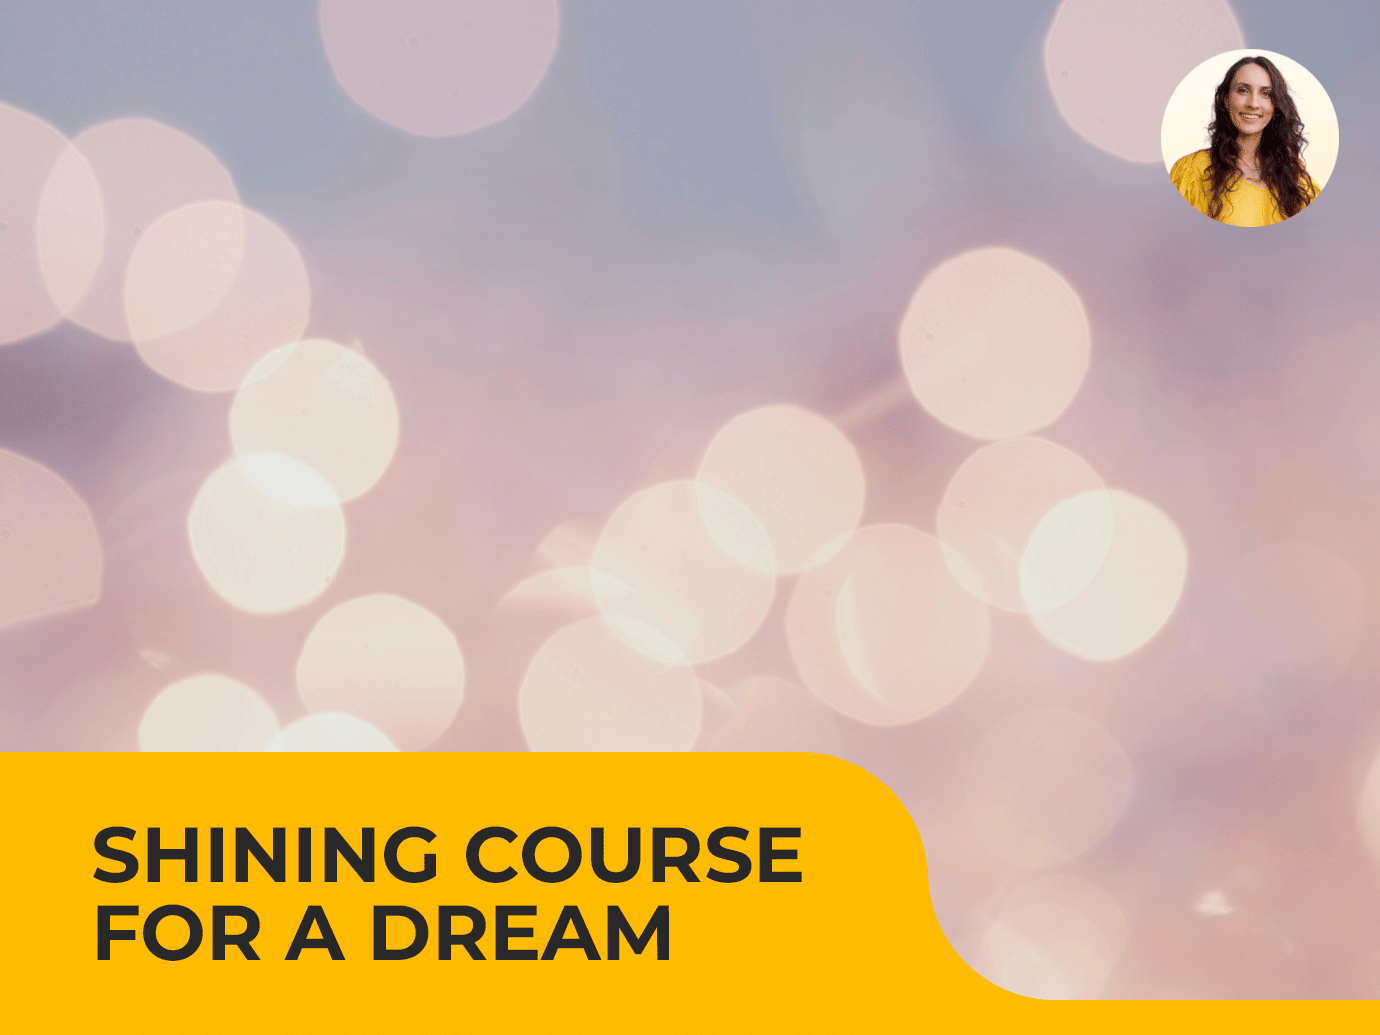 Shining course for a dream